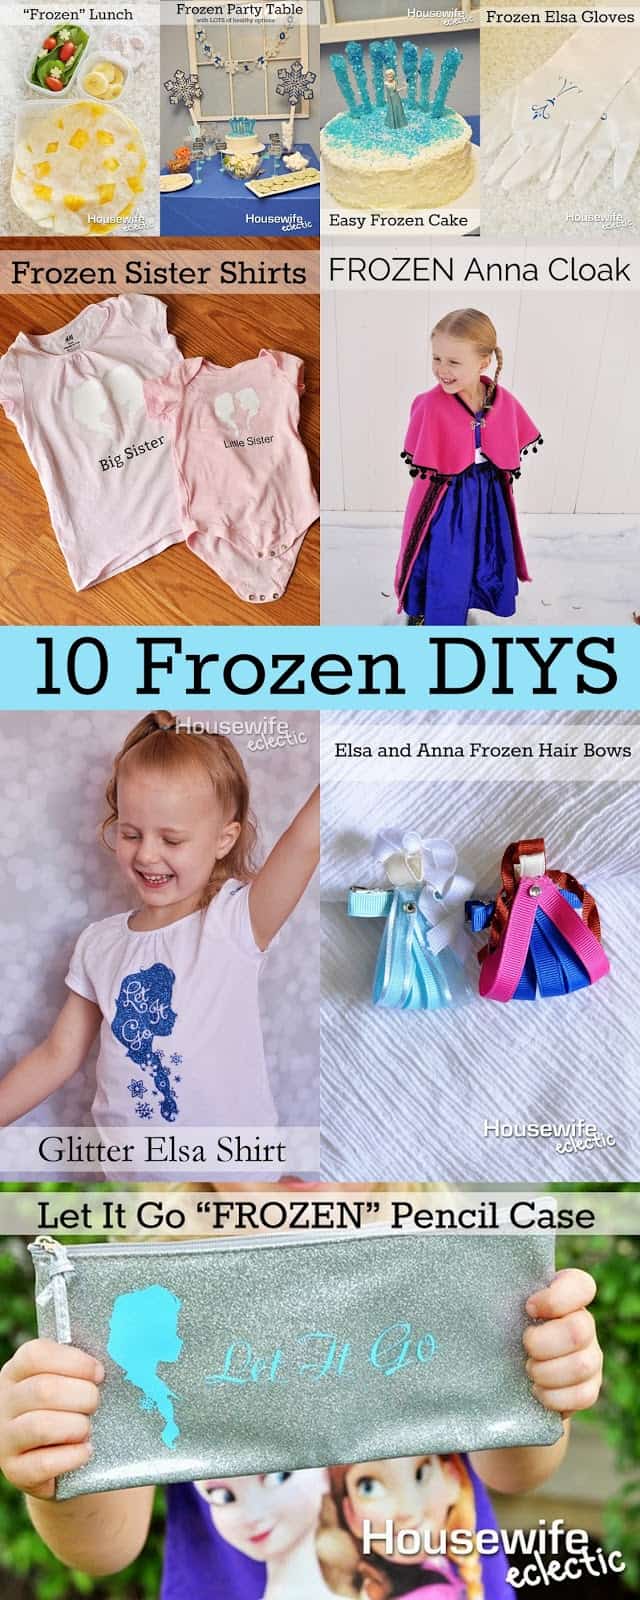 10 Ideas For Your Frozen Addict AND Disney on Ice Presents ...